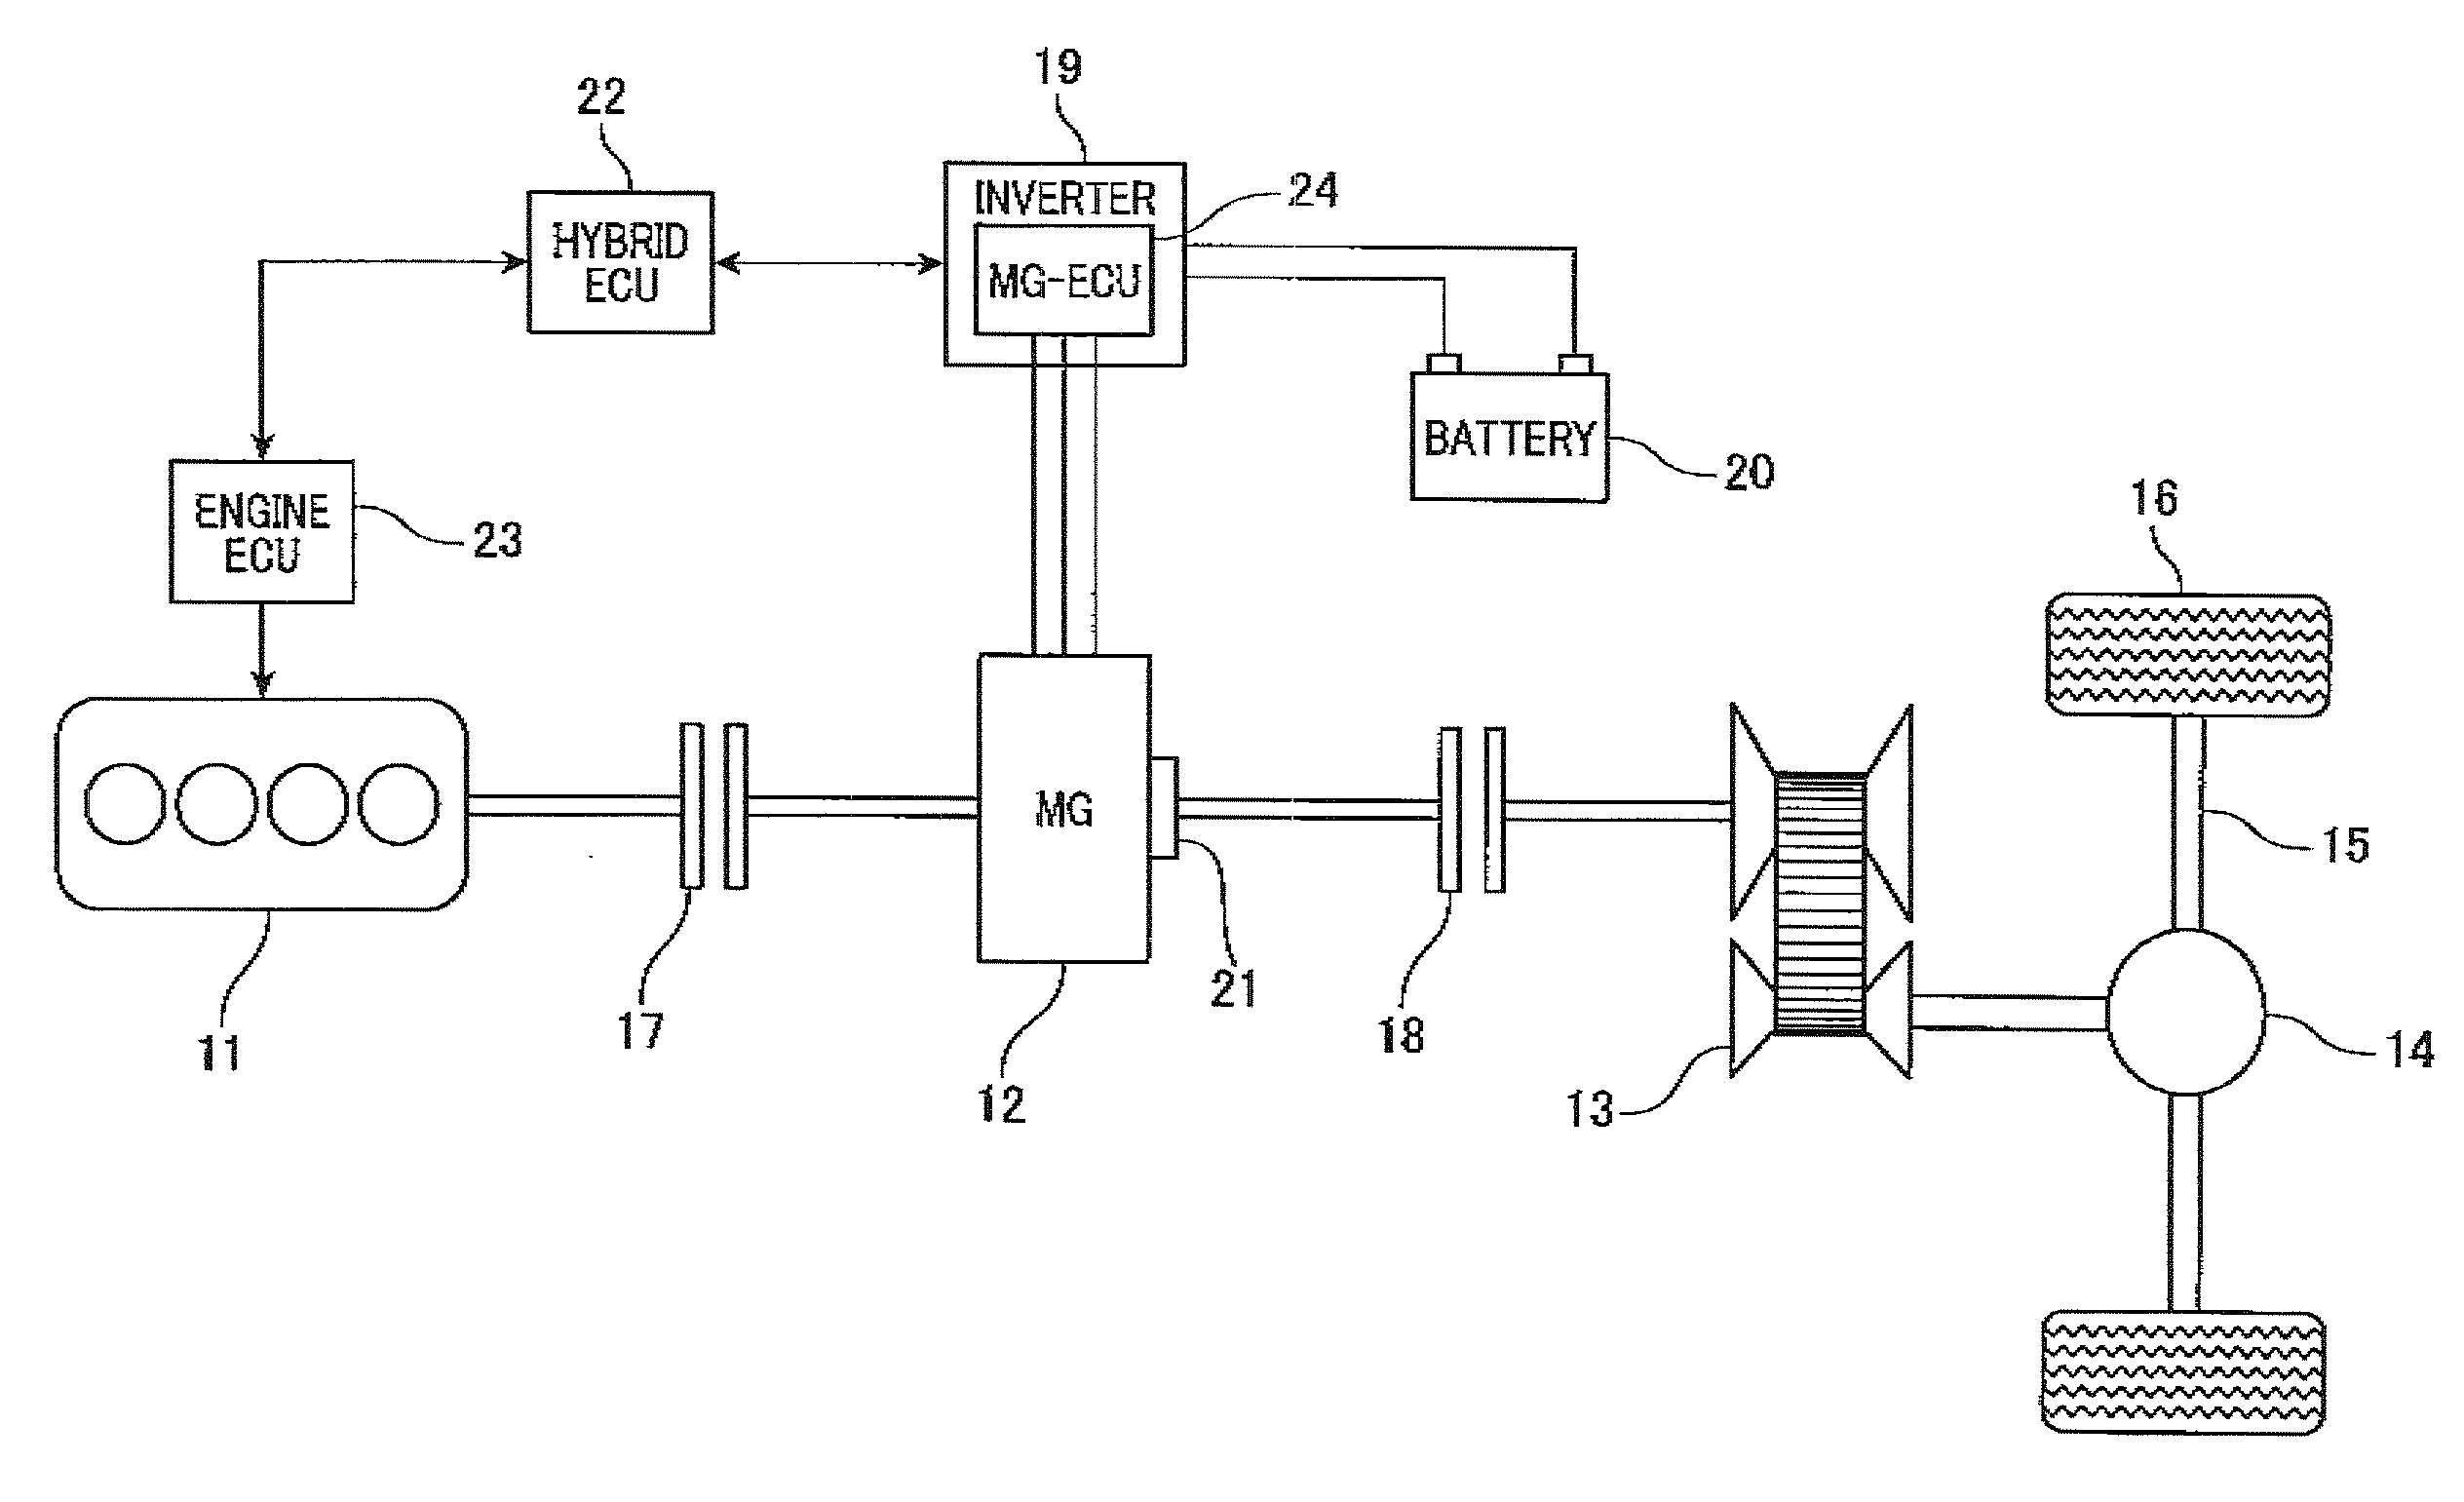 Motor control apparatus for hybrid vehicles